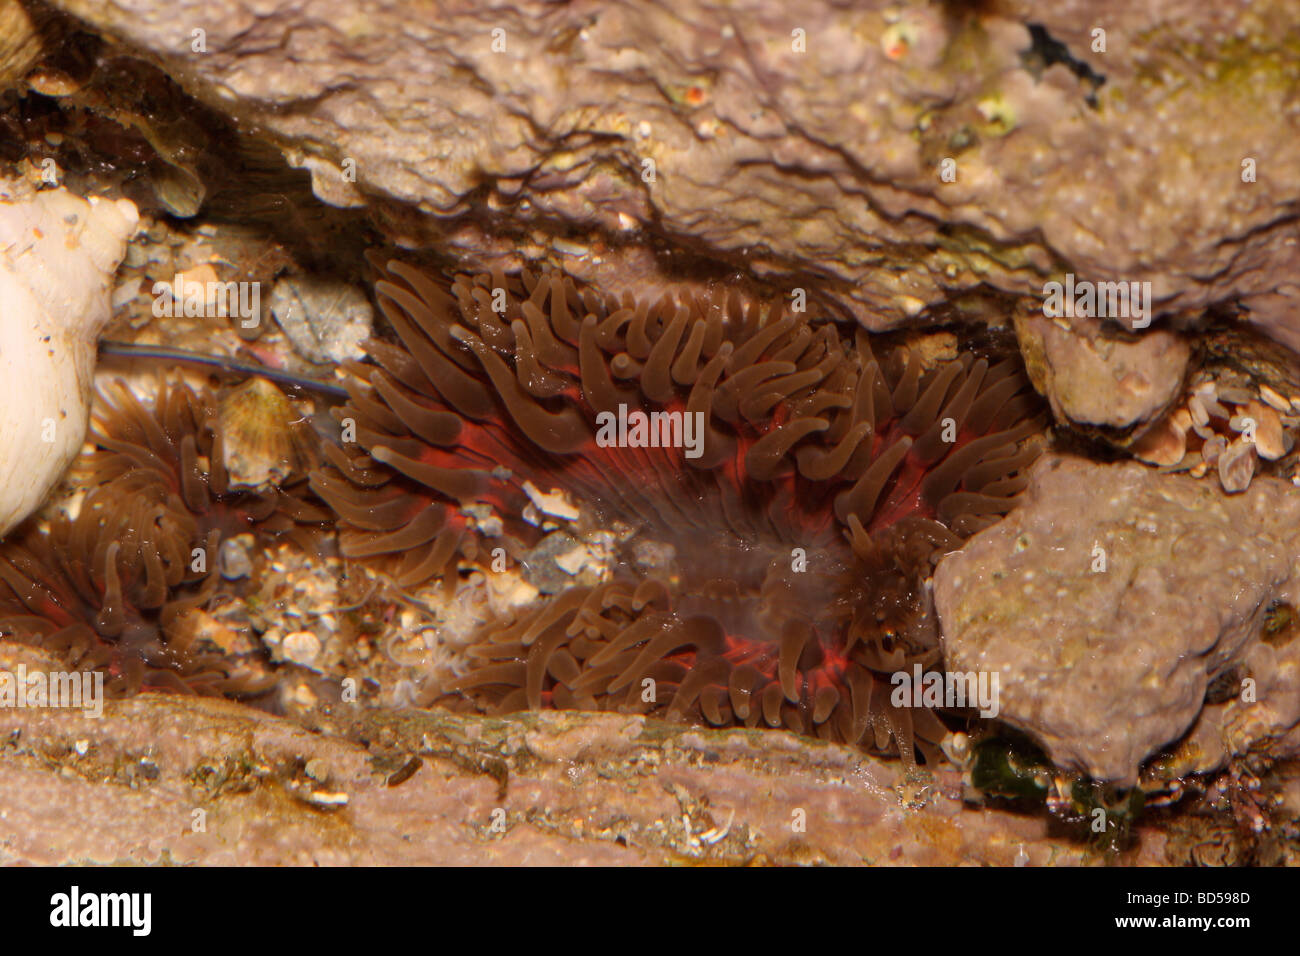 Daisy anemone Cereus pedunculatus Sagartiidae brown form with red on tentacles in a rock pool UK Stock Photo